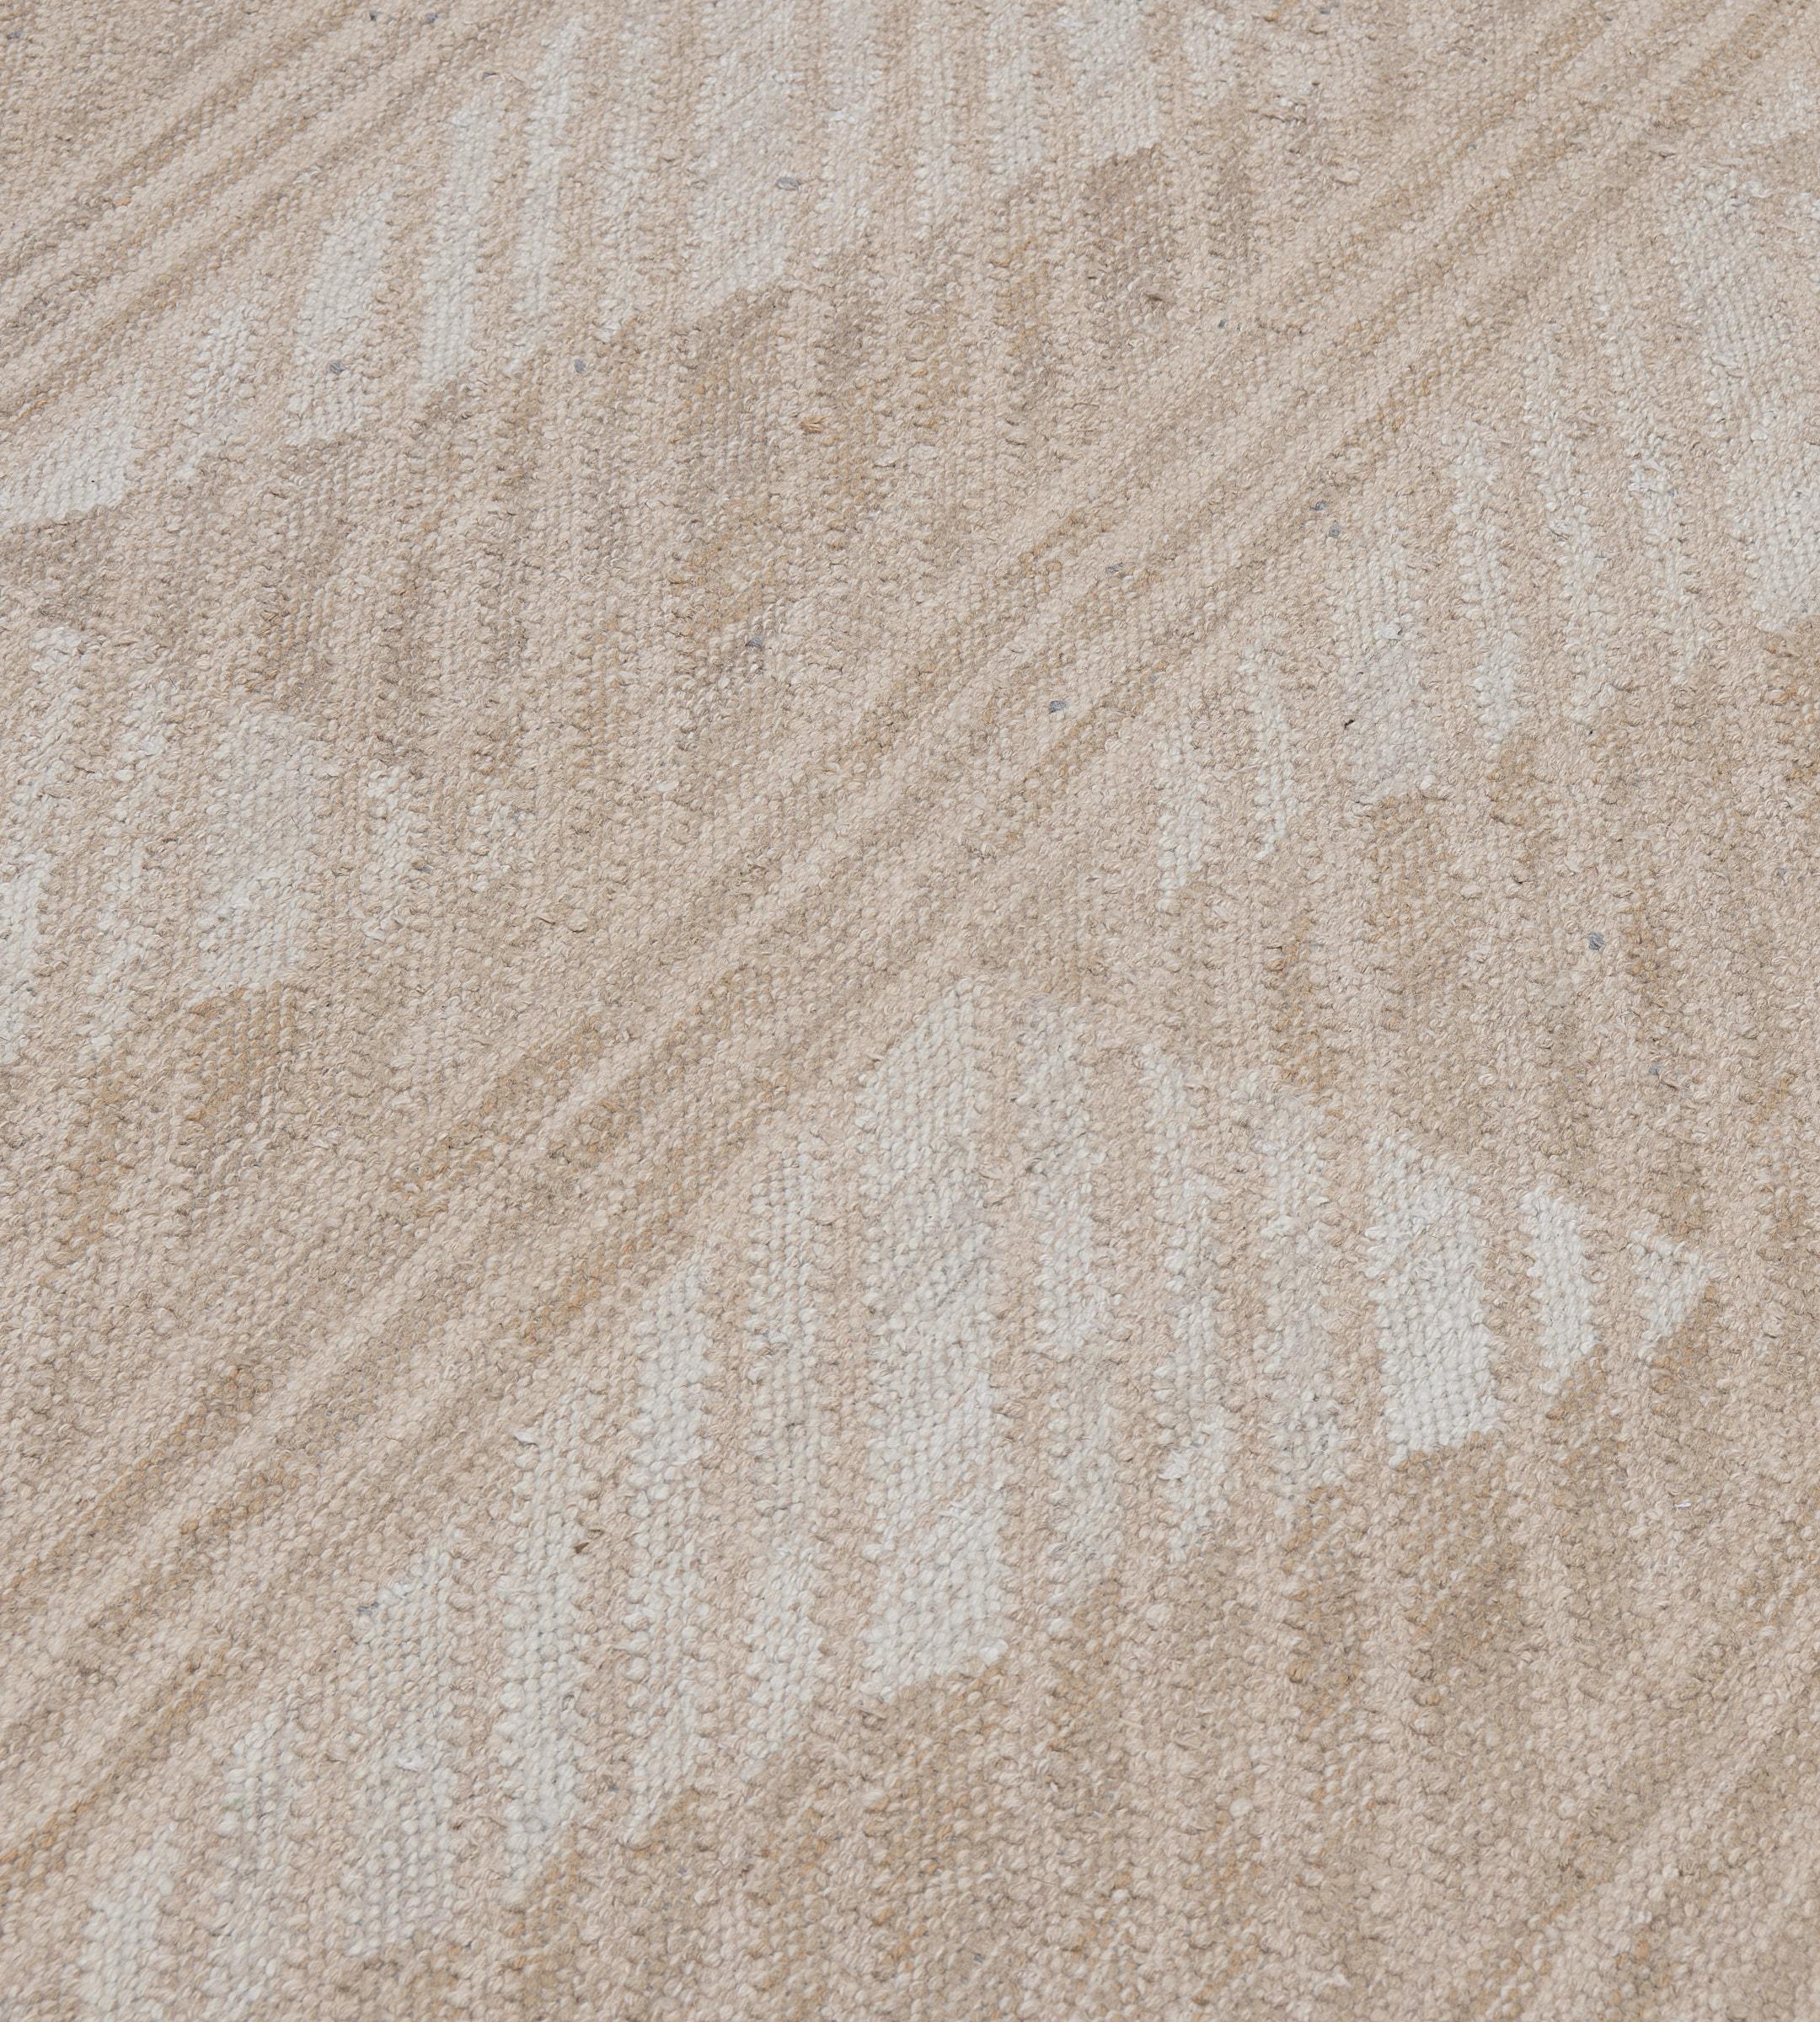 Contemporary Hand-woven 100% Wool Beige Graphic Rug 9'1 